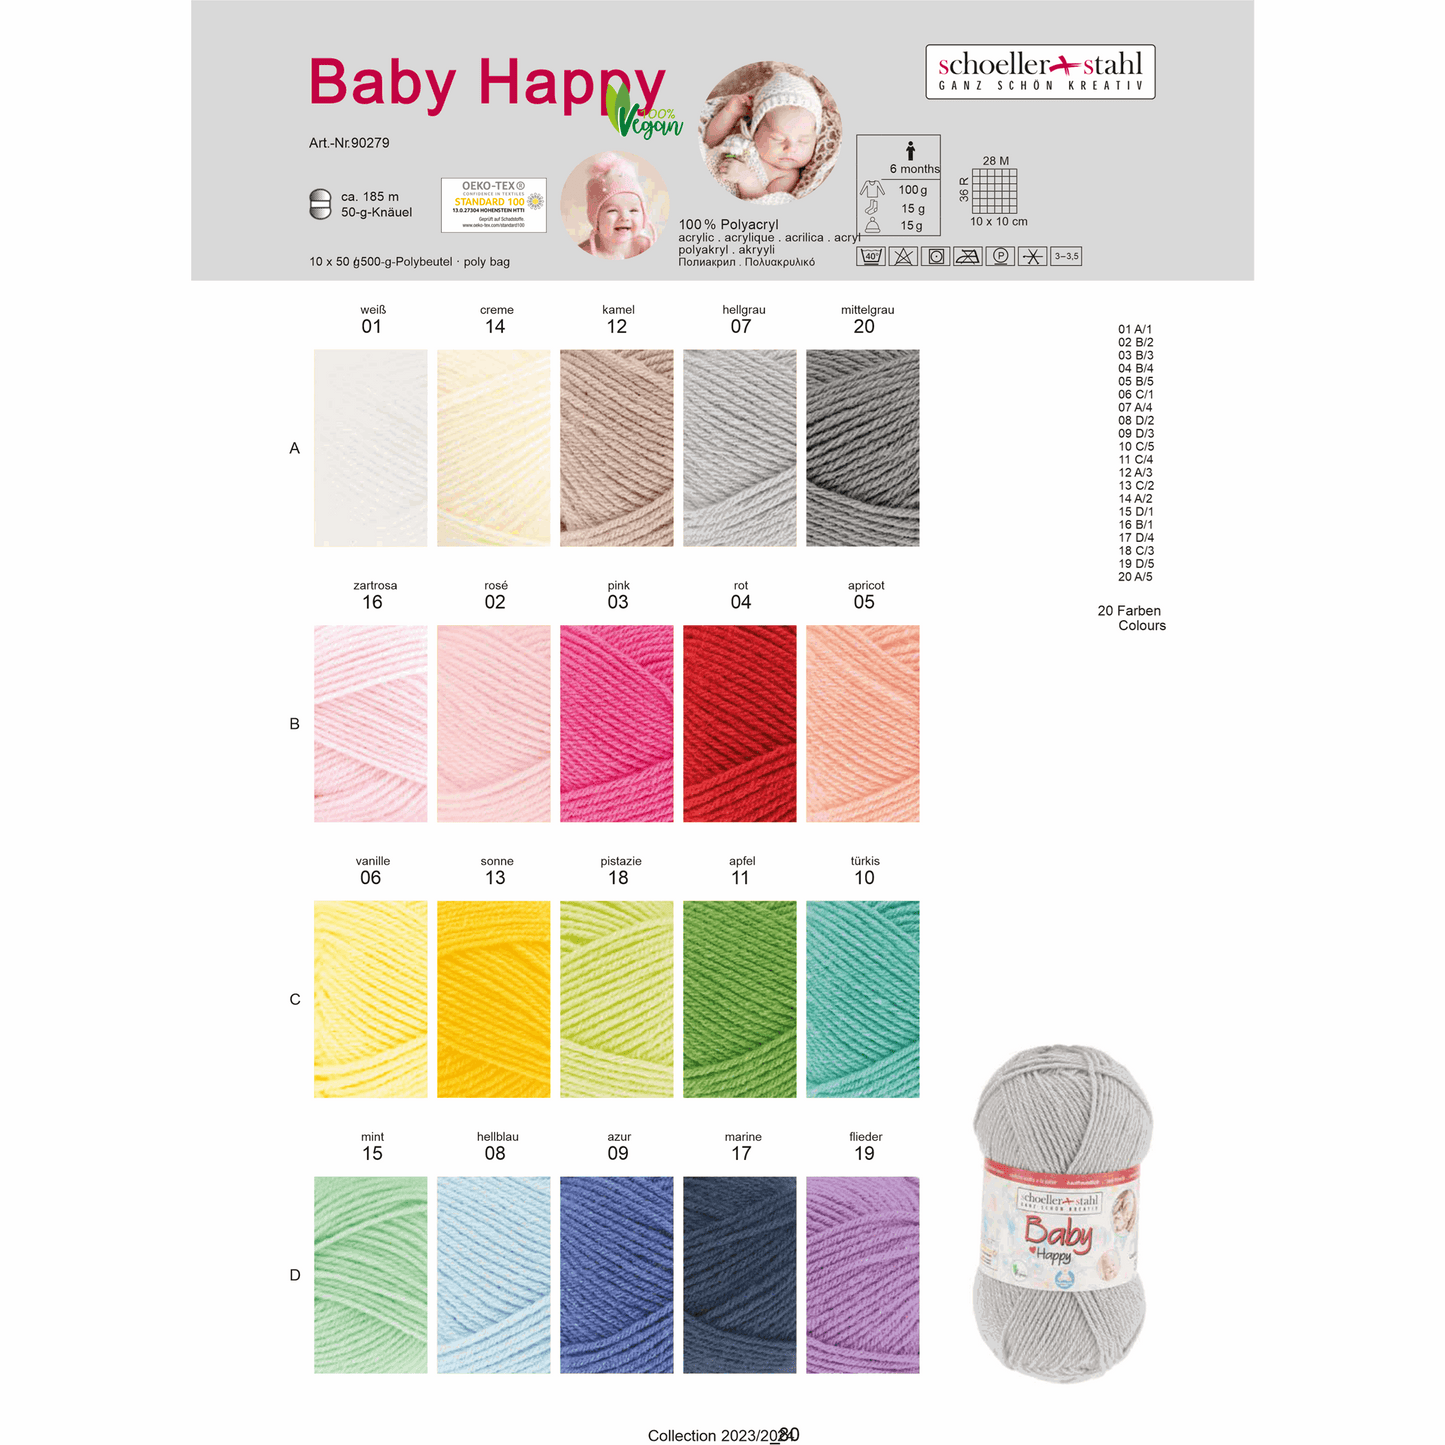 Baby happy 50g, 90279, Farbe 10, türkis